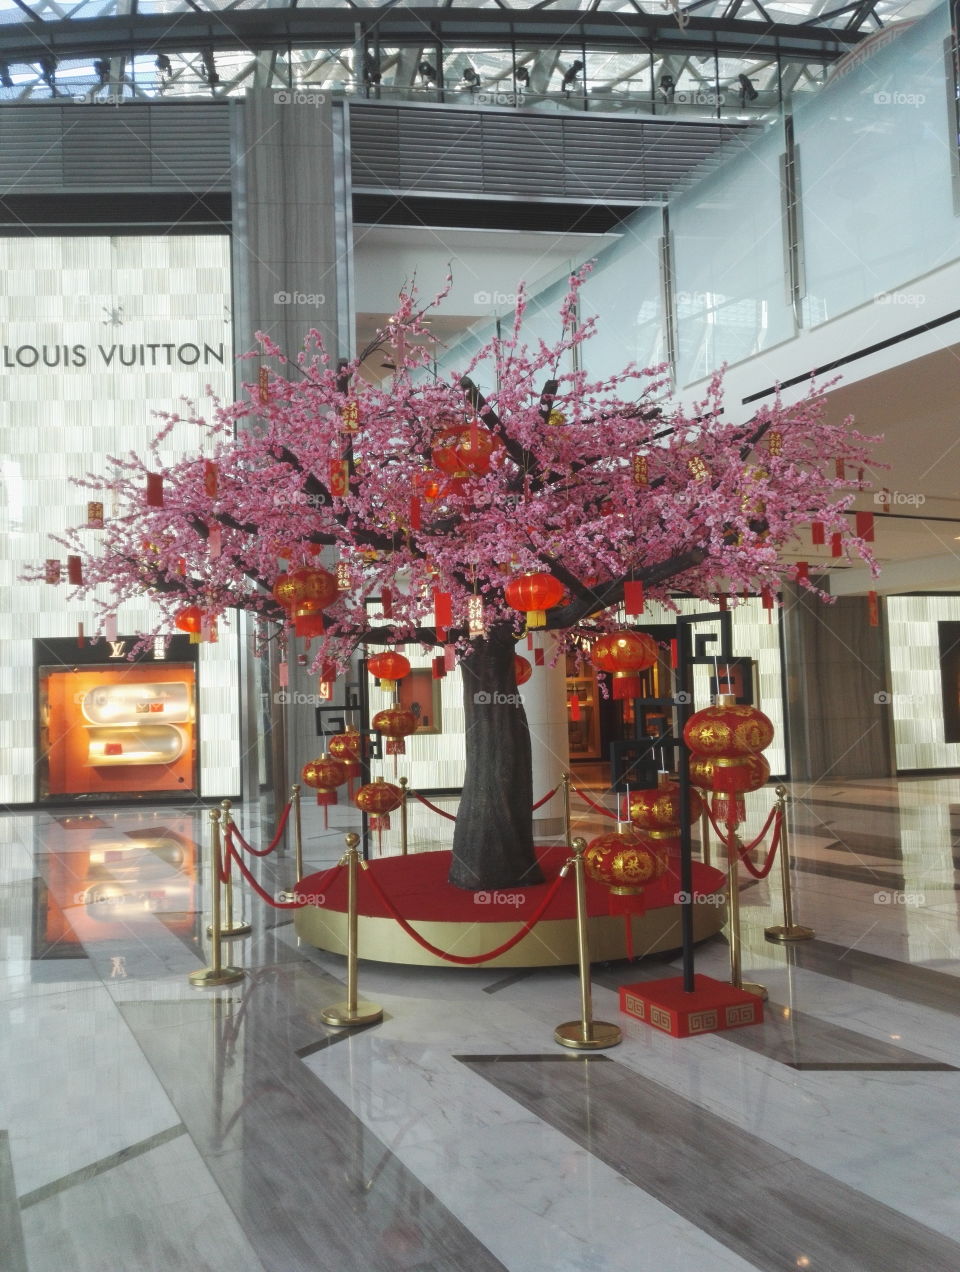 Tree of good fortune, Chinese New Year 2016 (year of the fire monkey) @ The Galleria Abu Dhabi.